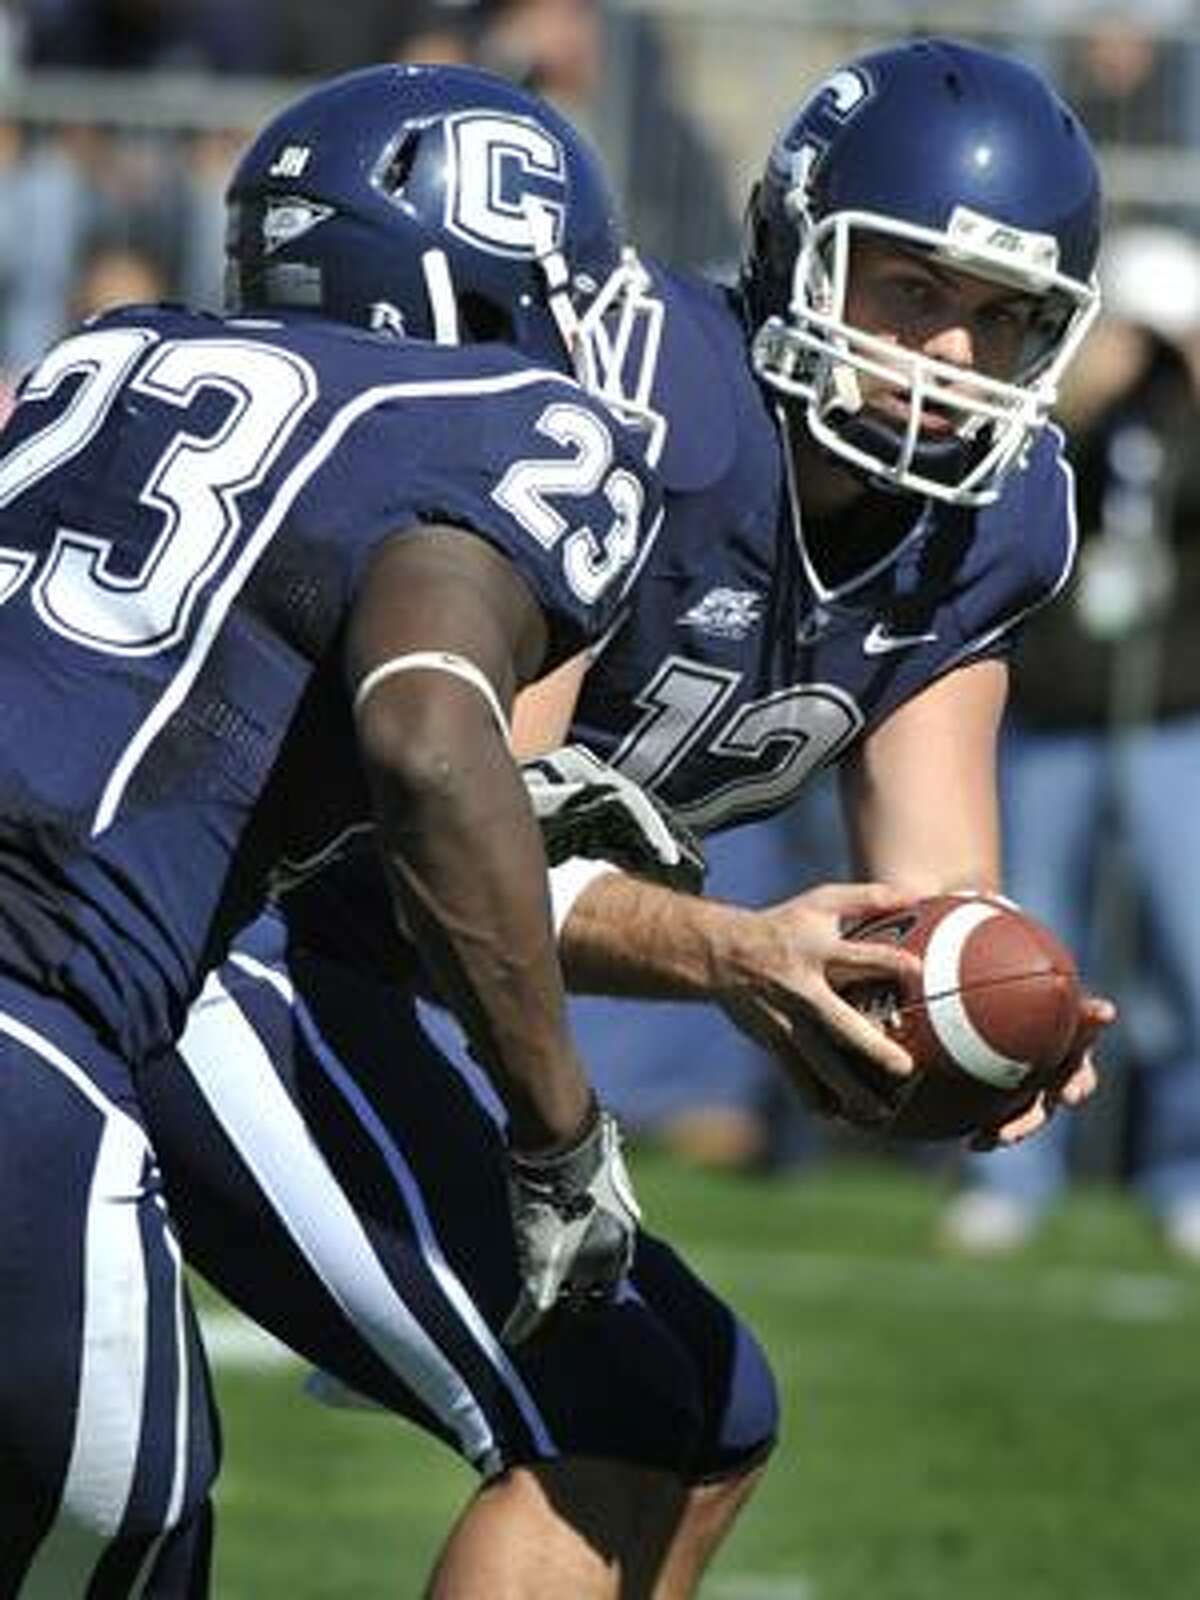 Connecticut quarterback Cody Endres, right, hands off to Jordan Todman (23) during the first half of a NCAA college football game against Vanderbilt in East Hartford, Conn., on Saturday, Oct. 2, 2010.(AP Photo/Jessica Hill)